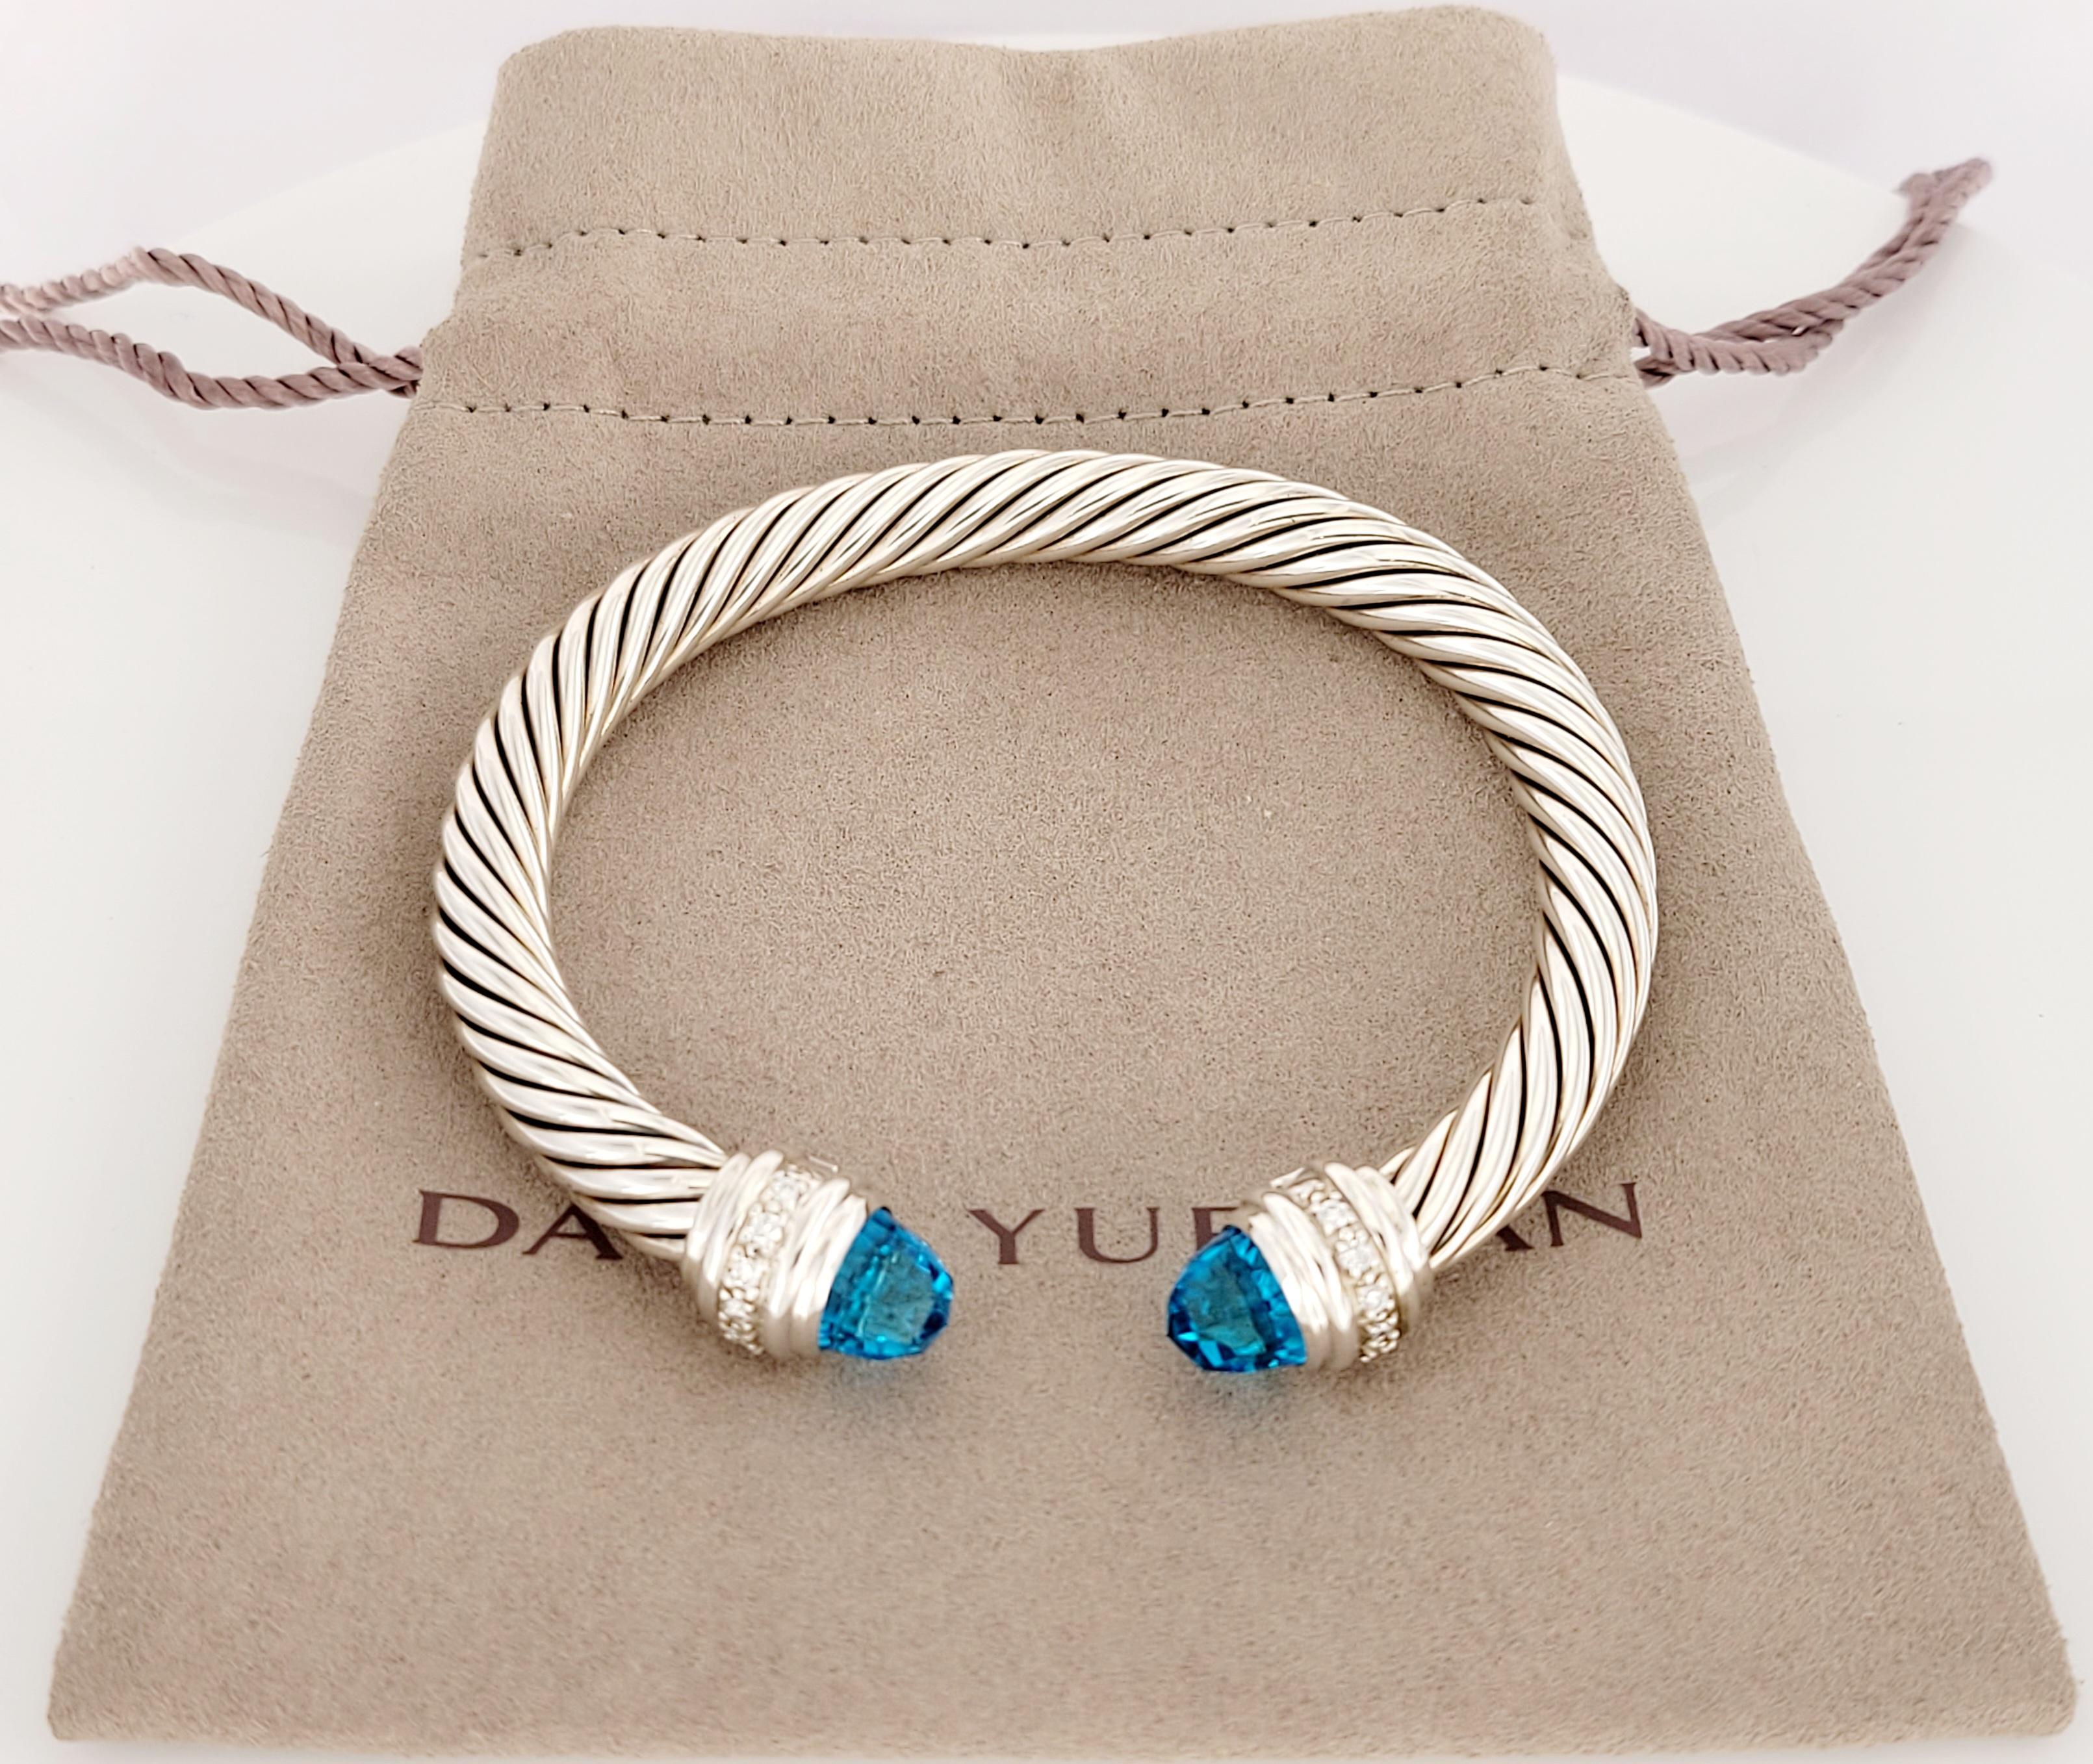 David yurman
Sterling Silver 
Condition New
Blue topaz 
Pave-Set Diamonds 0.41 Total carat weight 
Bracelet 7mm
Weight 40.3gr
Retail price $1900
Comes with David Yurman pouch